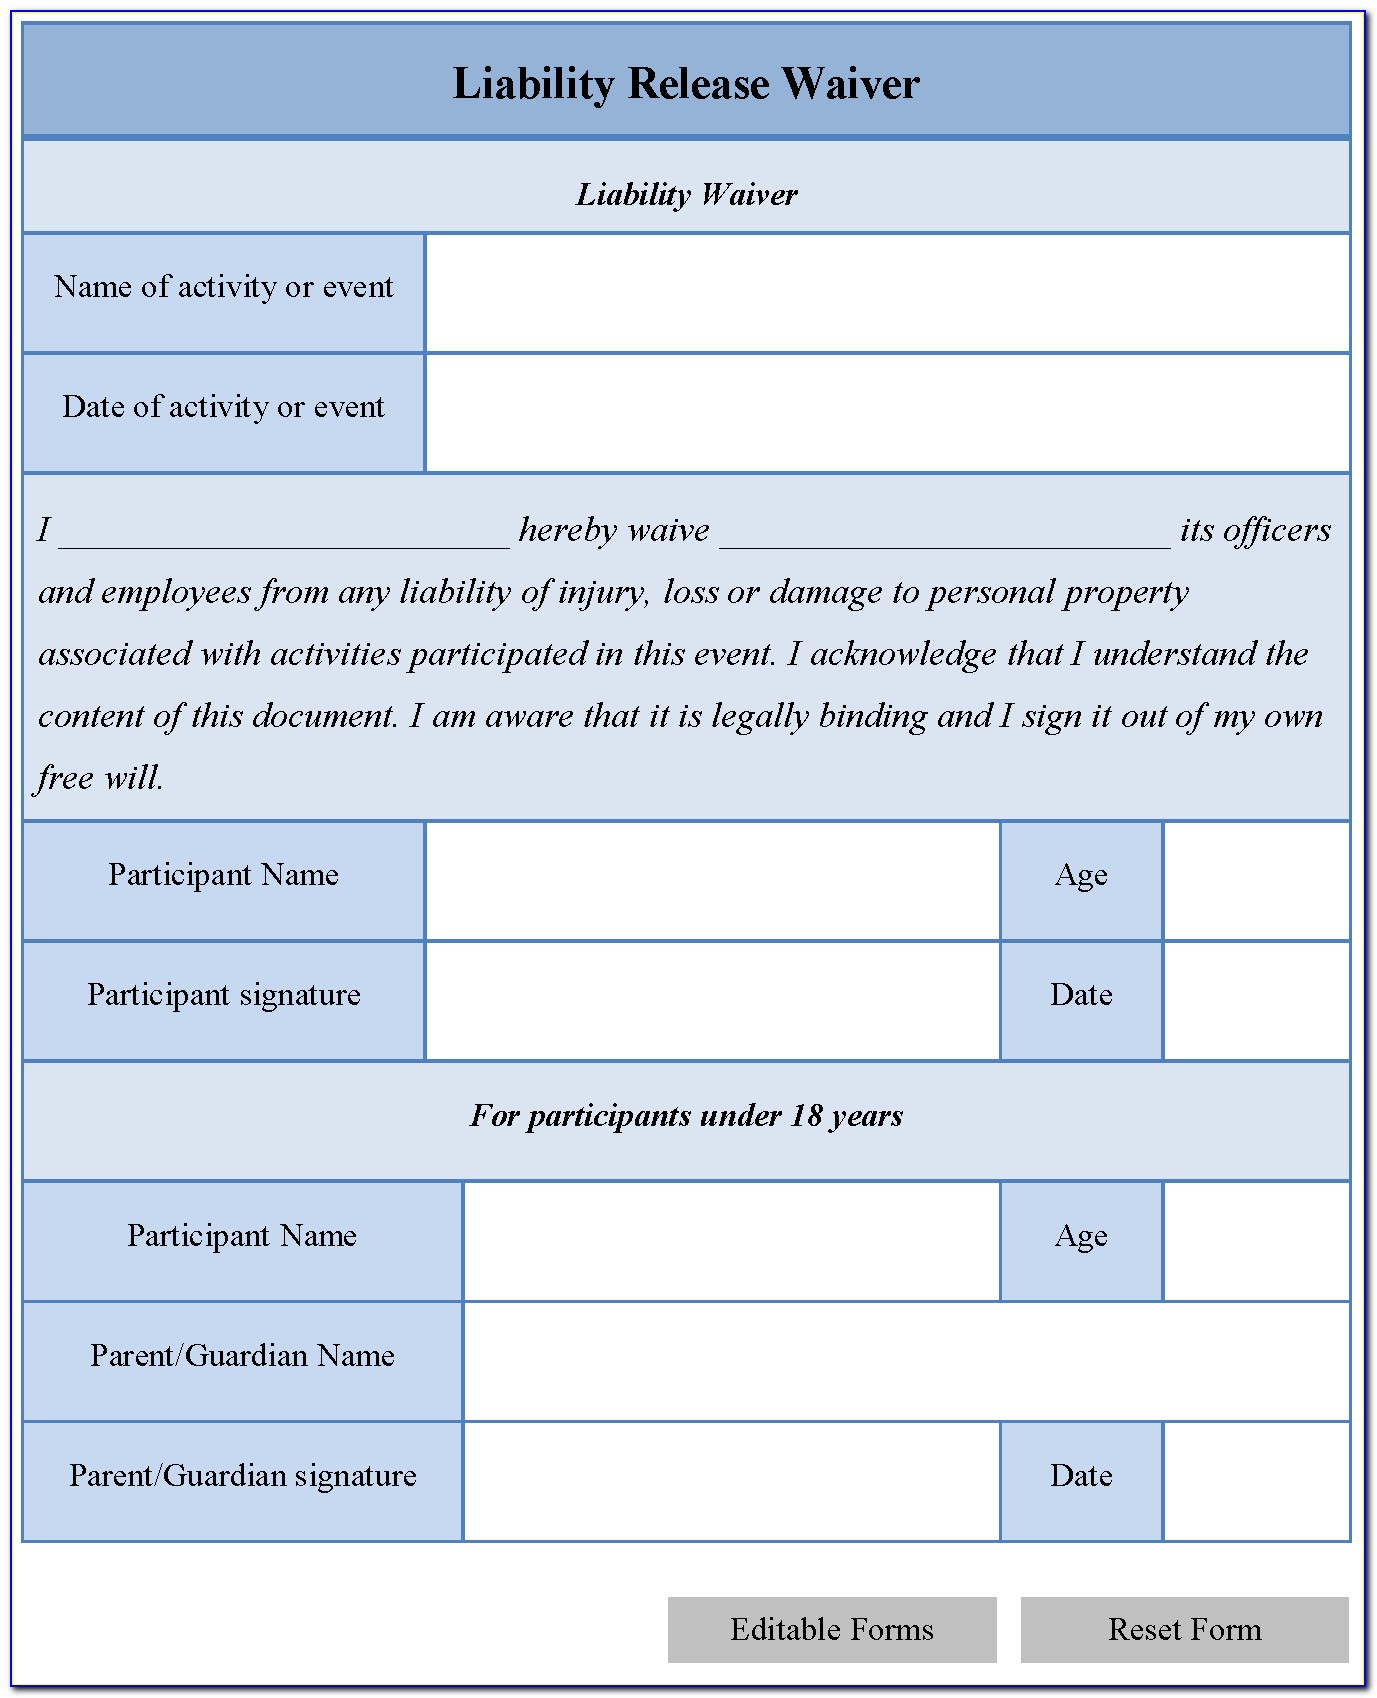 General Liability Waiver Form Florida